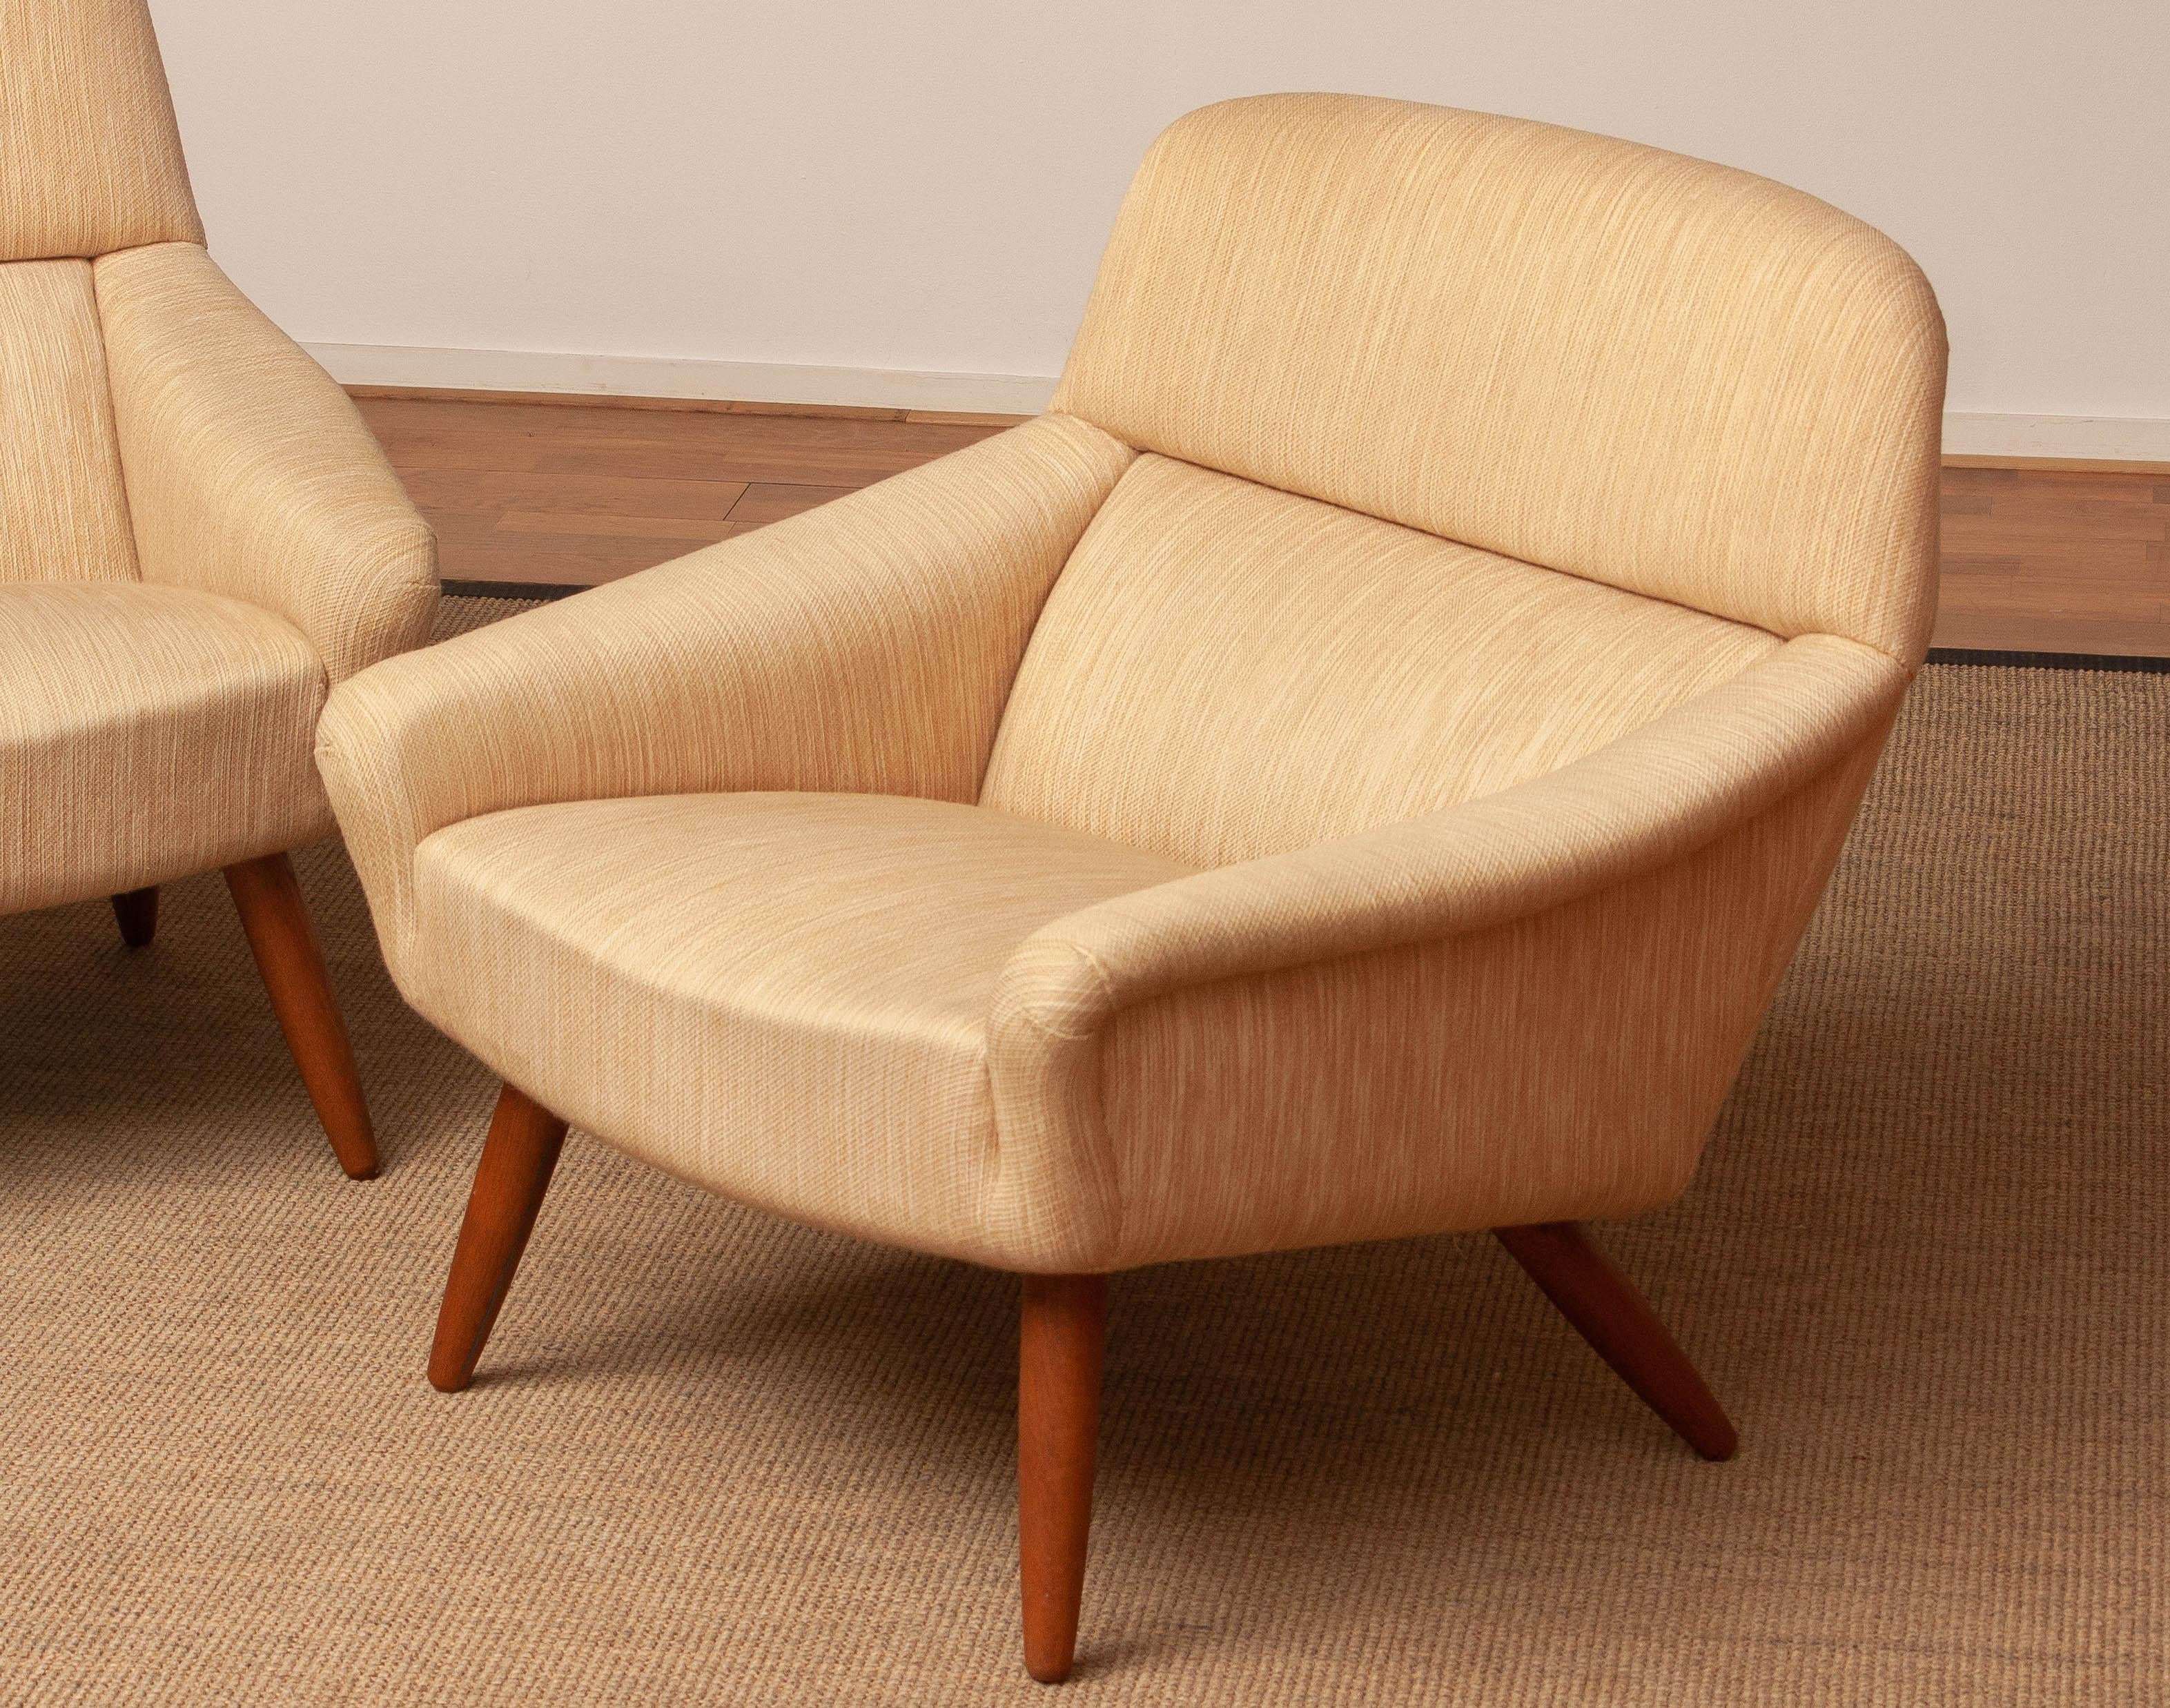 1960s Pair Wool and Oak Lounge Chairs by Leif Hansen for Kronen in Denmark In Good Condition For Sale In Silvolde, Gelderland